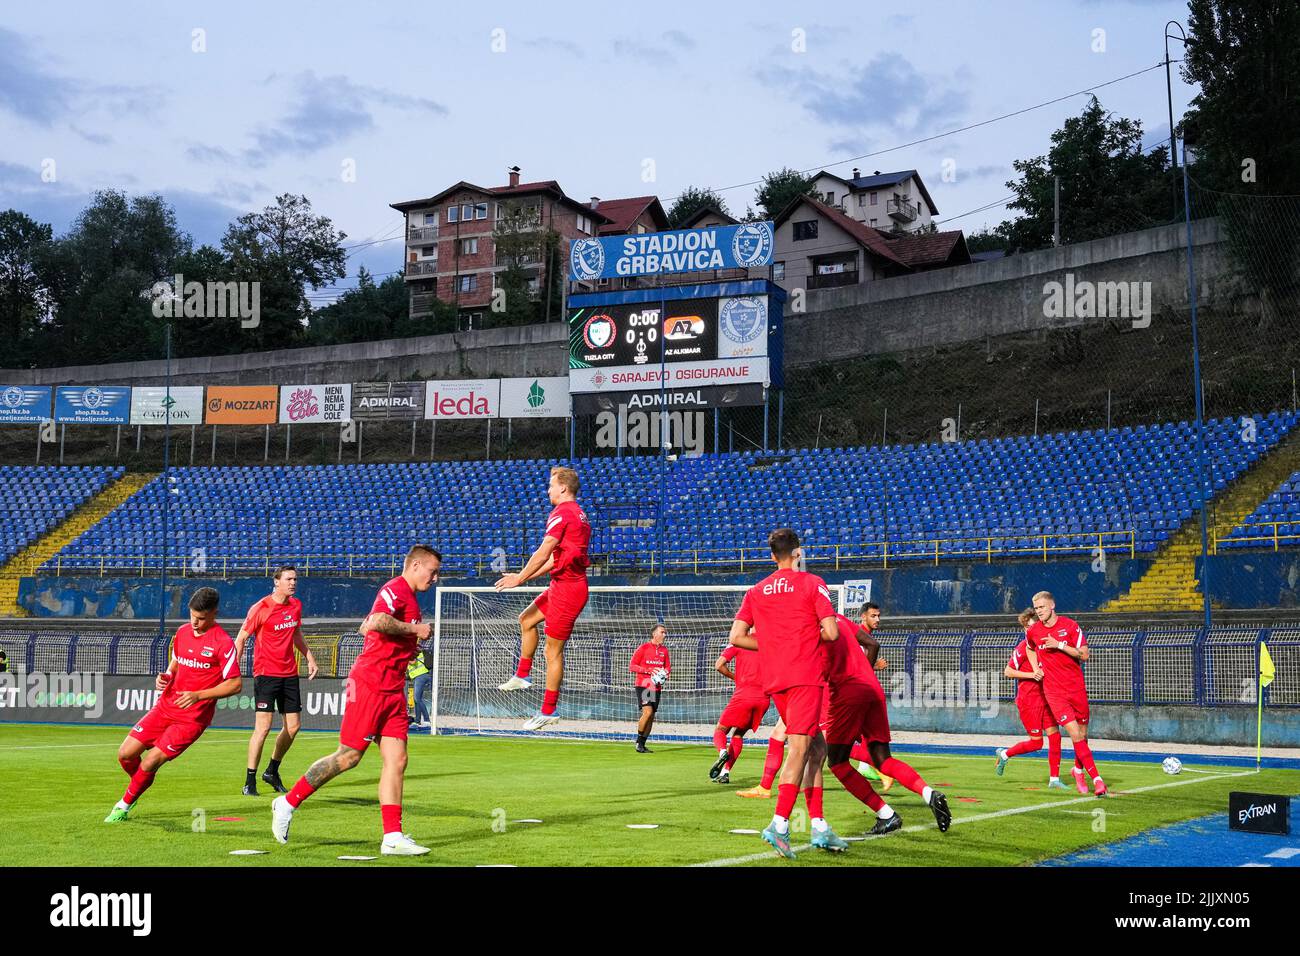 SARAJEVO - AZ players during the second qualifying round of the Conference League match between FK Tuzla City and AZ at the stadium Grbavica on July 28, 2022 in Sarajevo, Bosnia and Herzegovina. ANP ED OF THE POL Stock Photo